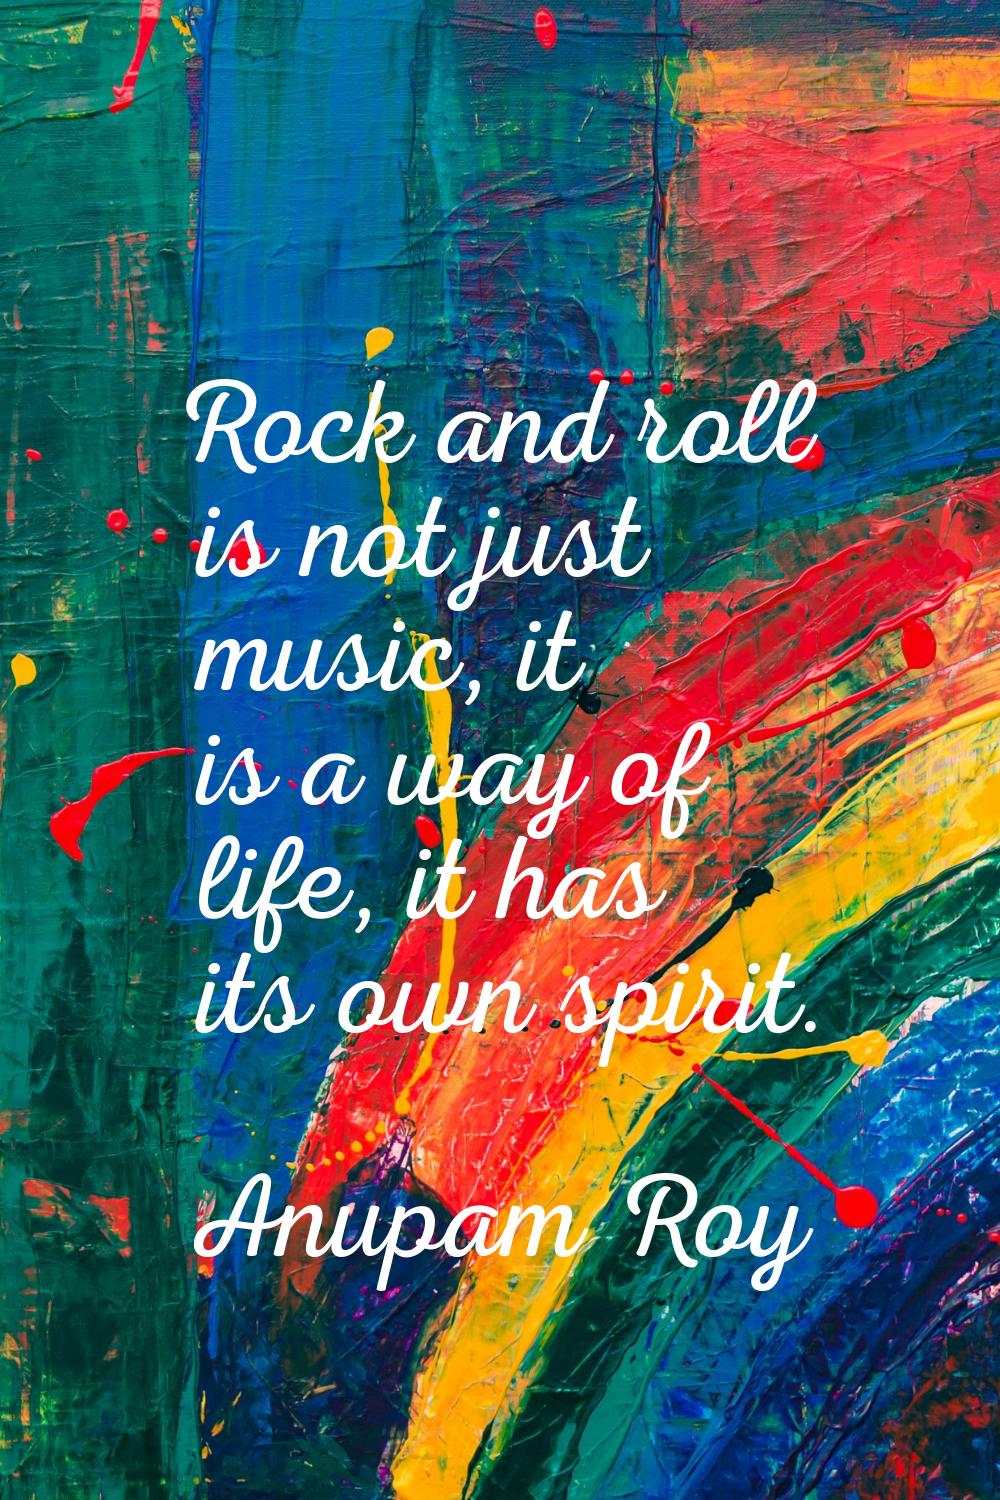 Rock and roll is not just music, it is a way of life, it has its own spirit.